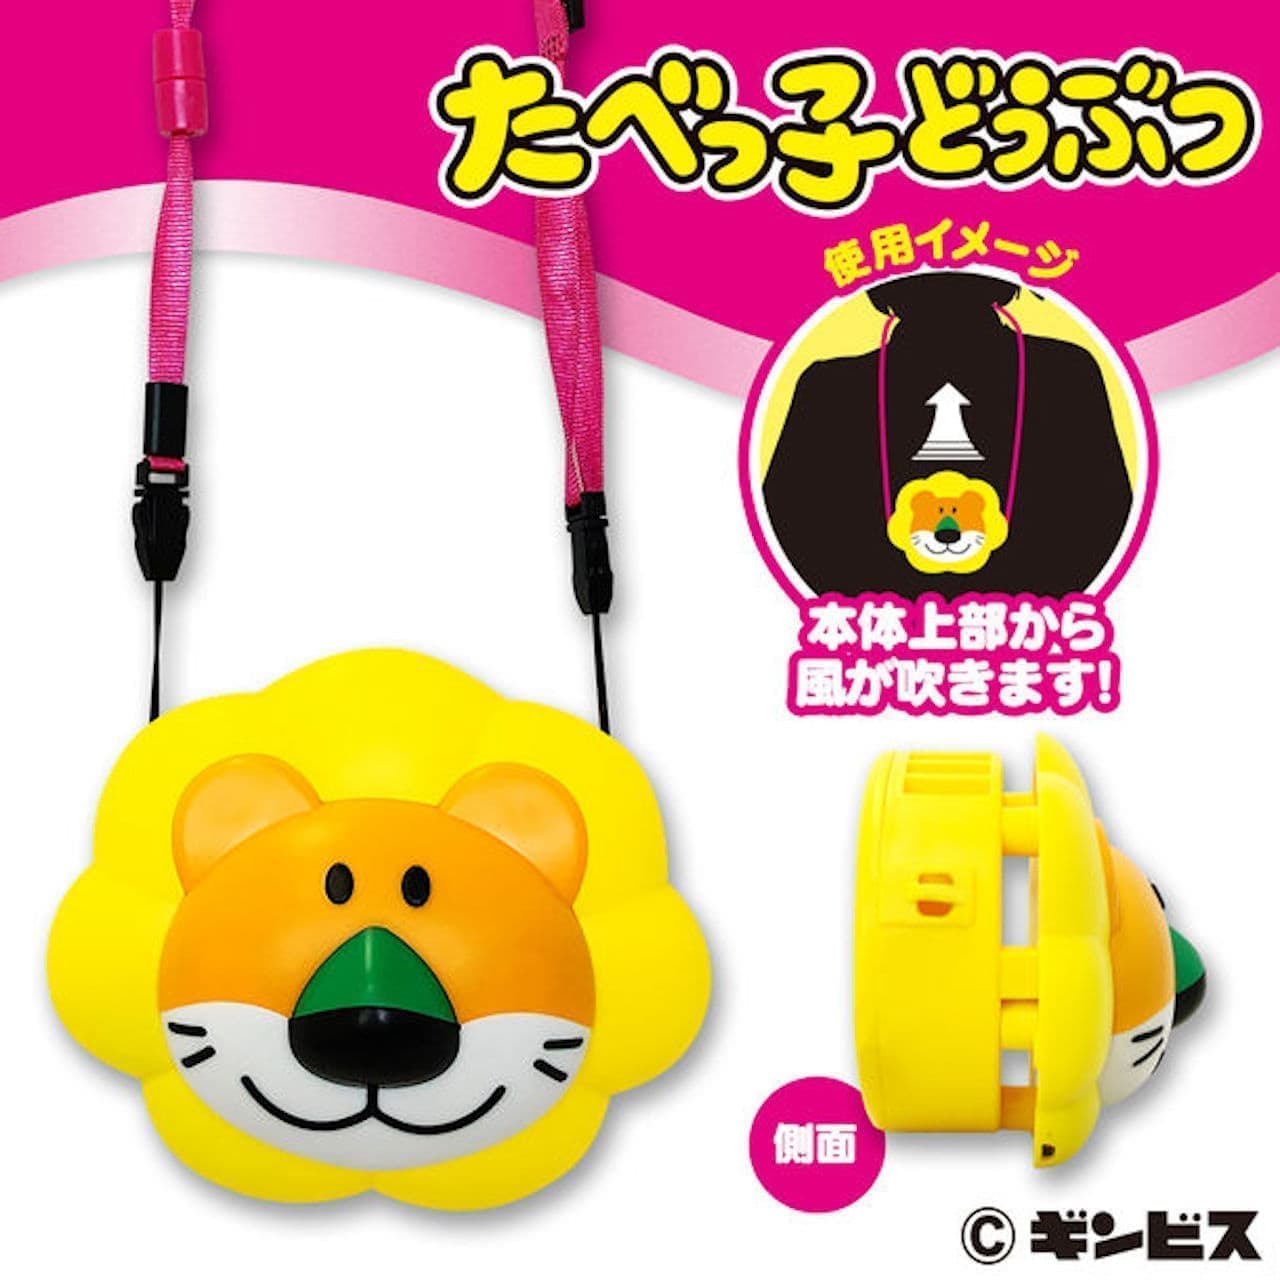 Prize exclusively for the crane game "TABEKOKO DOBUTSU Wearable Fan".